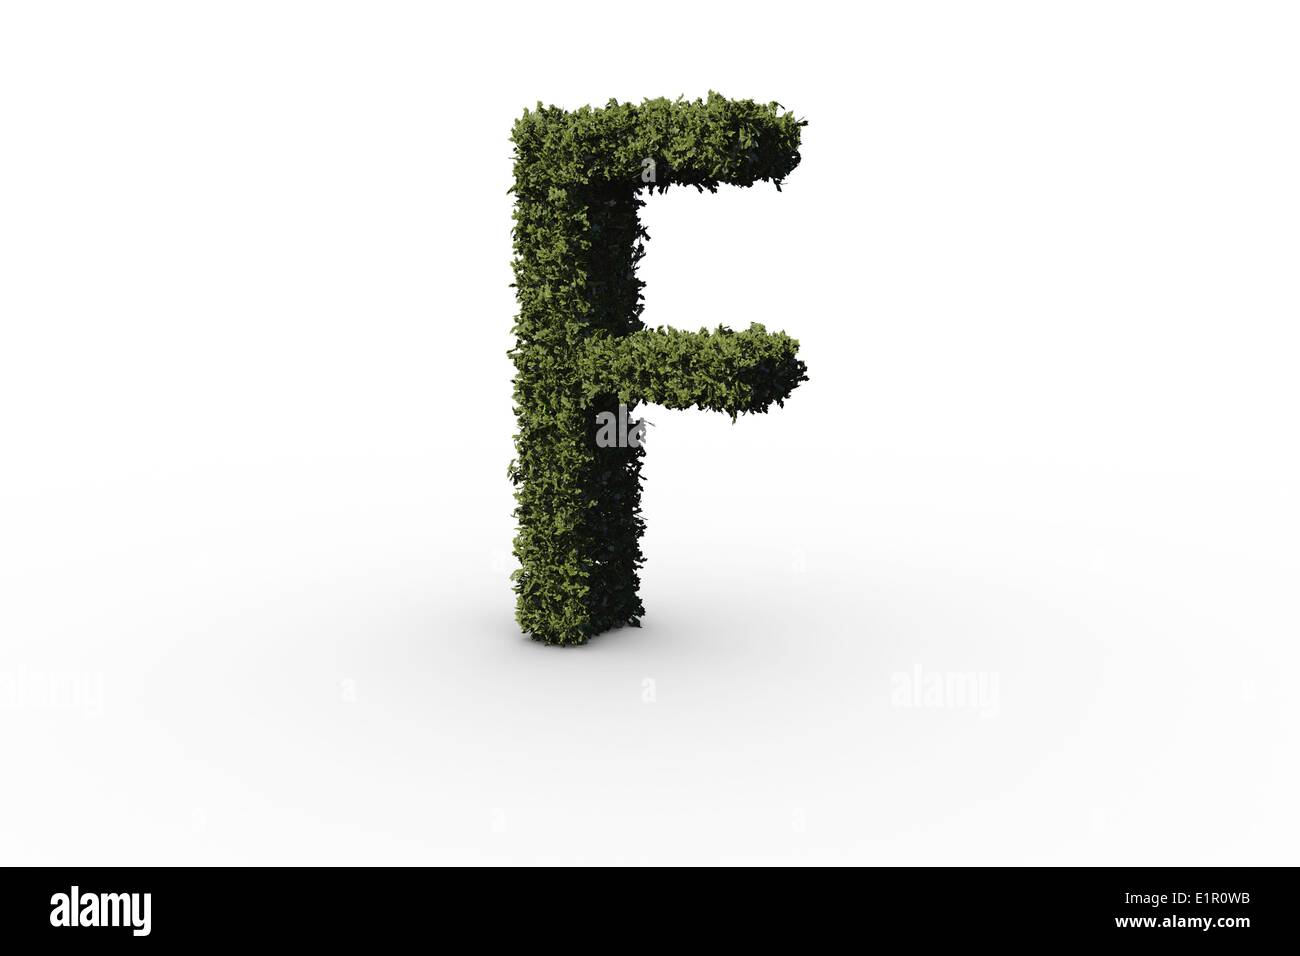 Letter f made of leaves Stock Photo